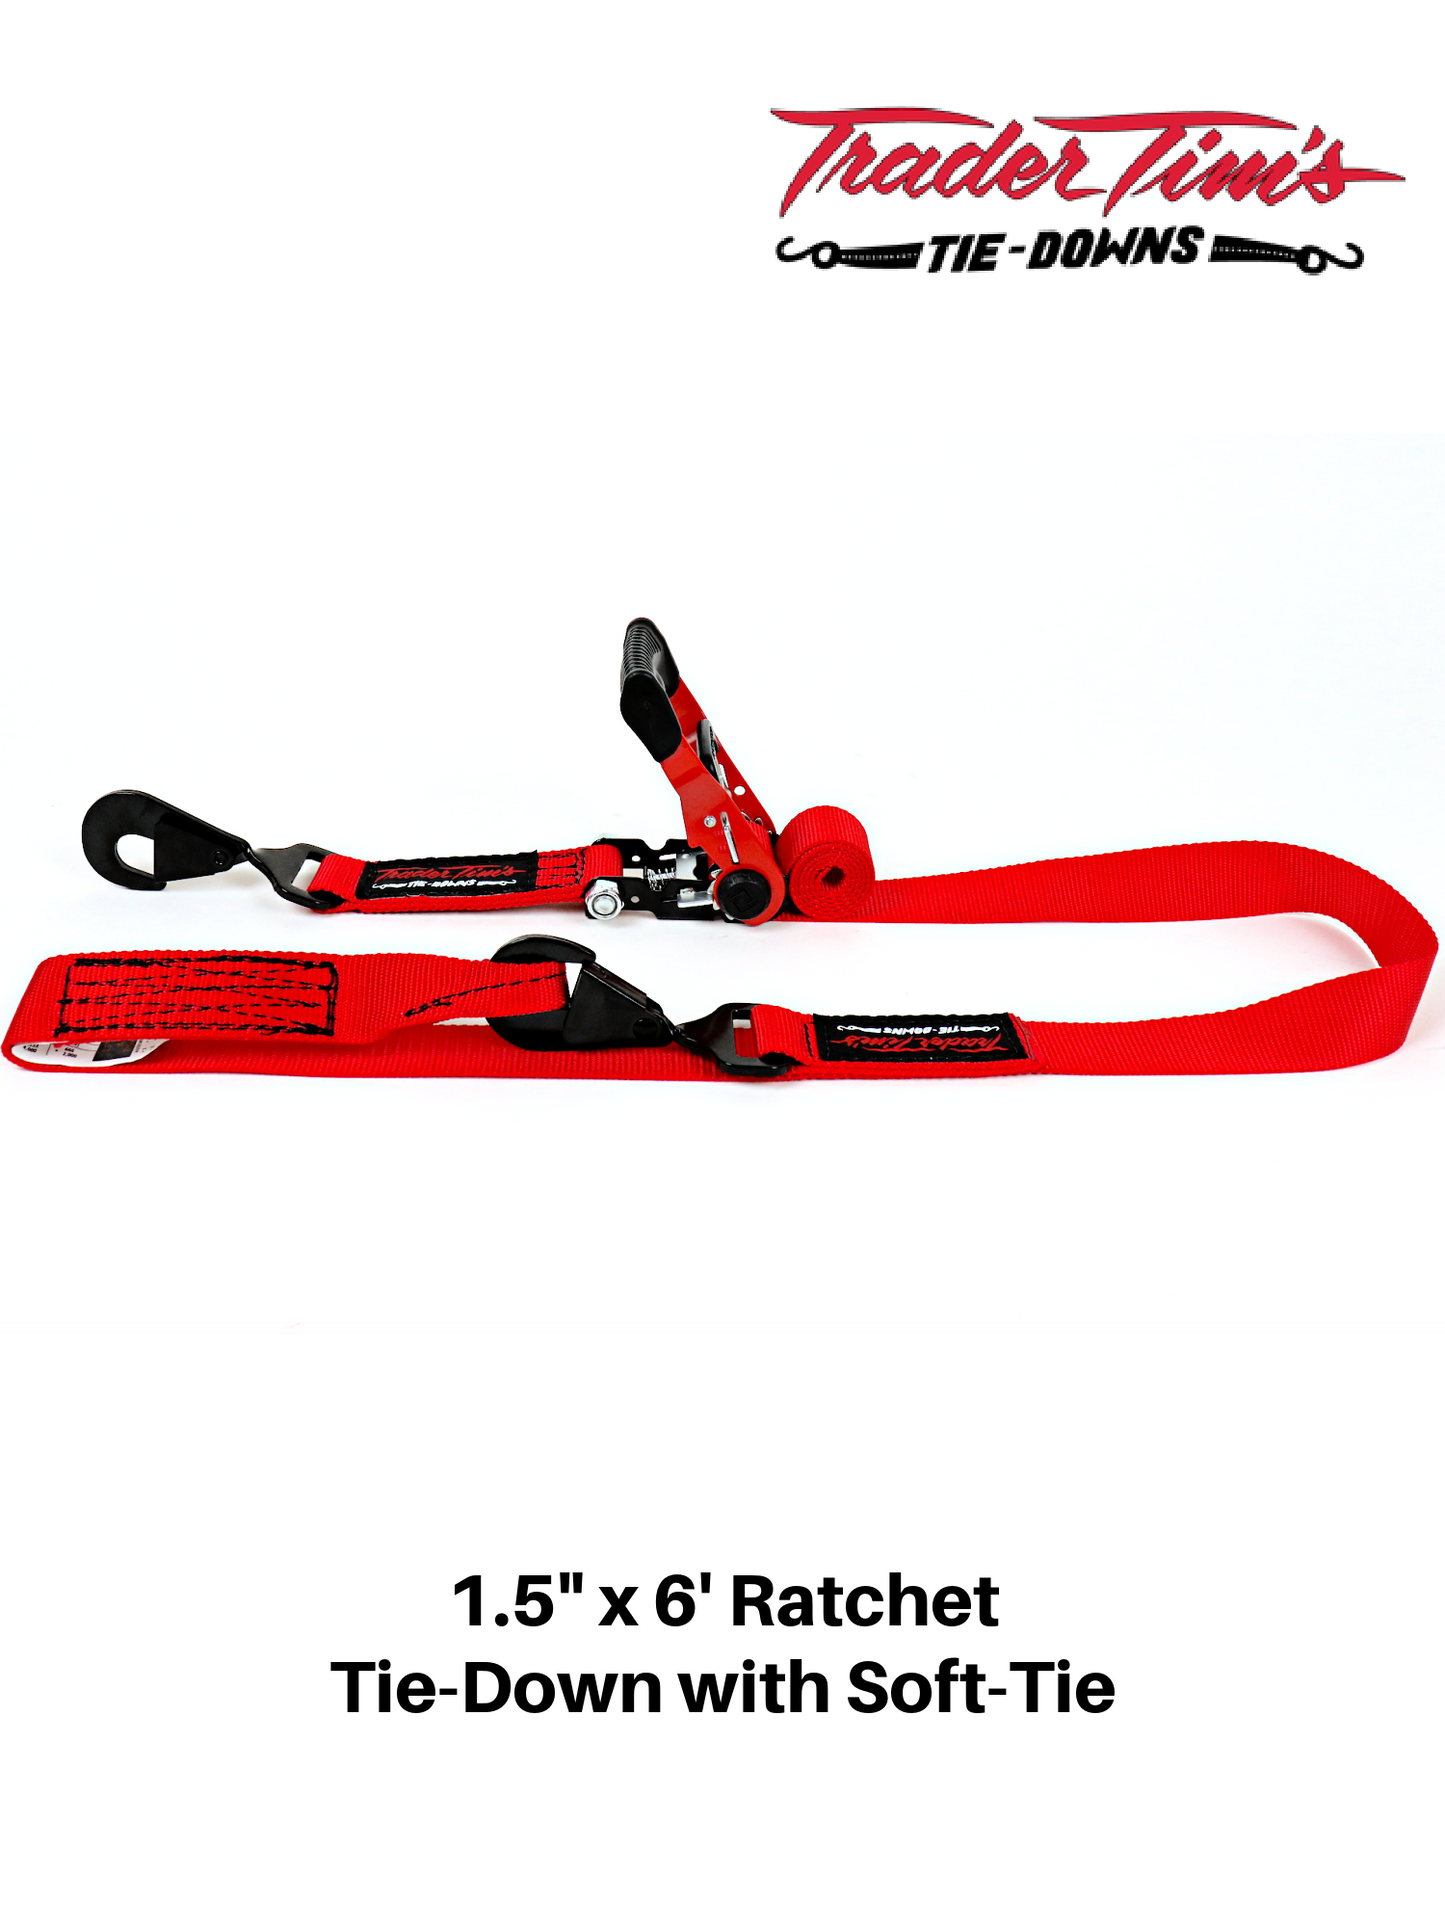 1.5" x 6' Ratchet Tie-Down with Soft-Tie - Red or Black